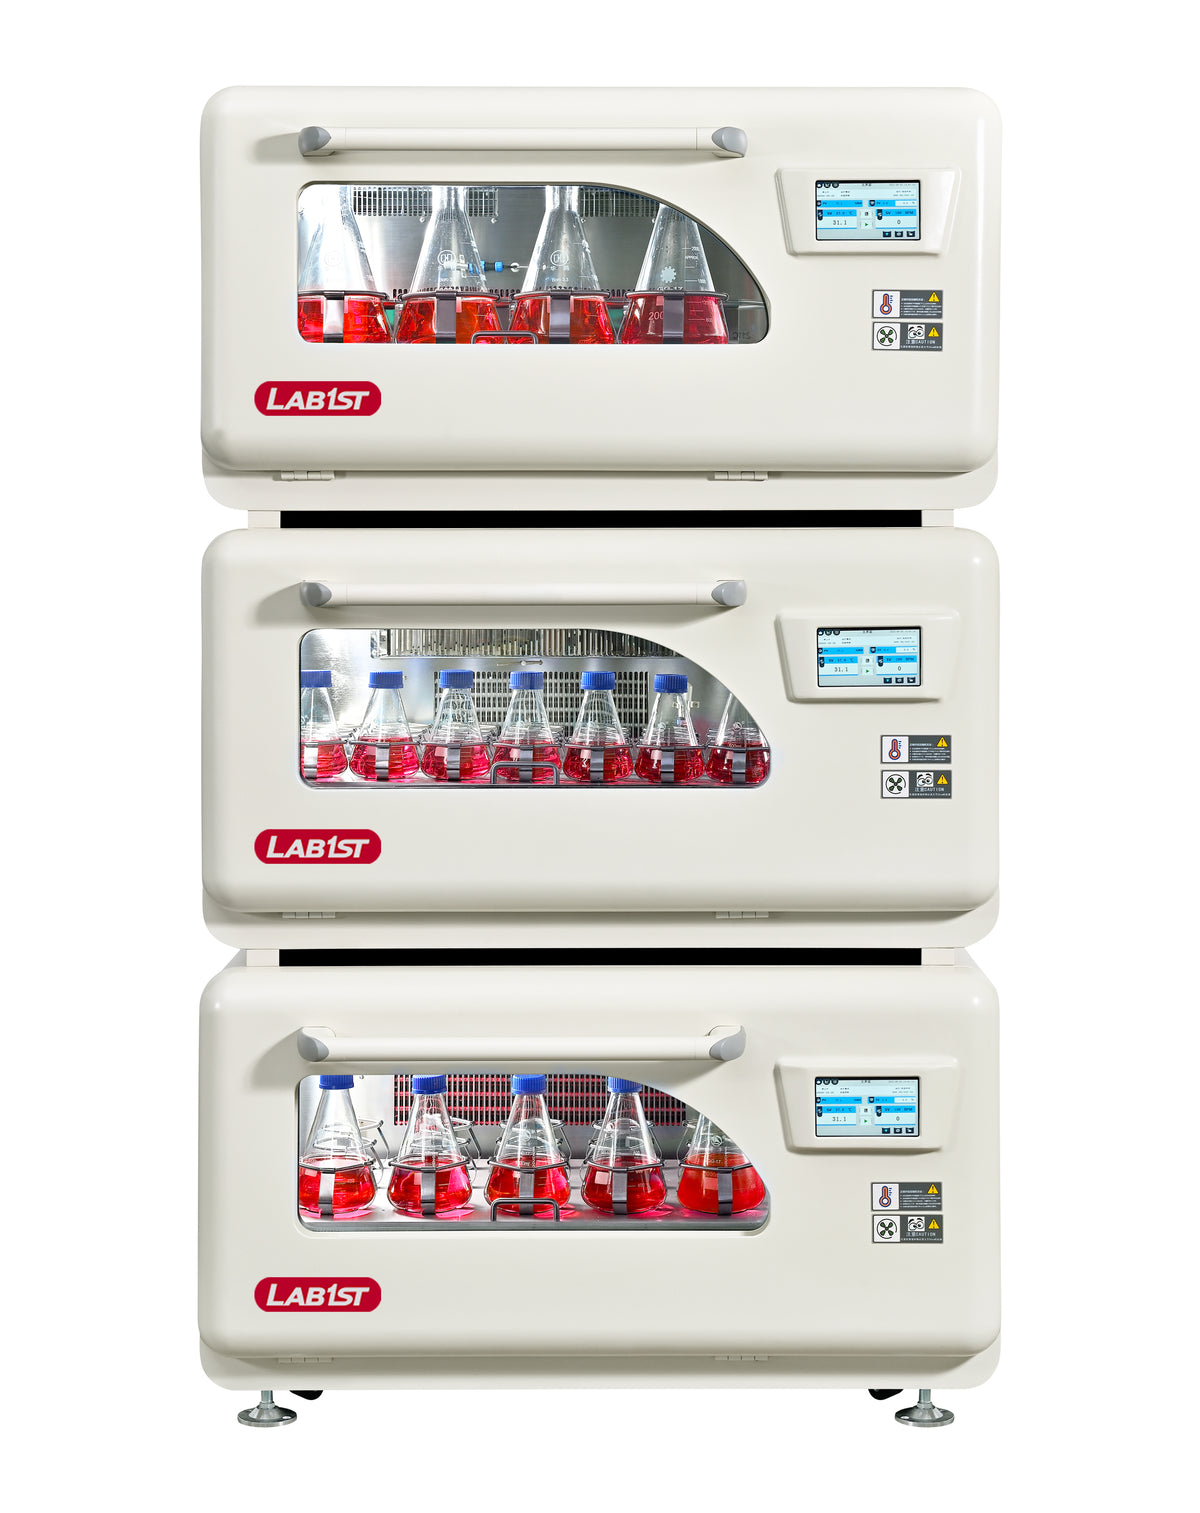 Lab1st 208L Programmable Stackable CO₂ Incubator Shaker ISC208/208R